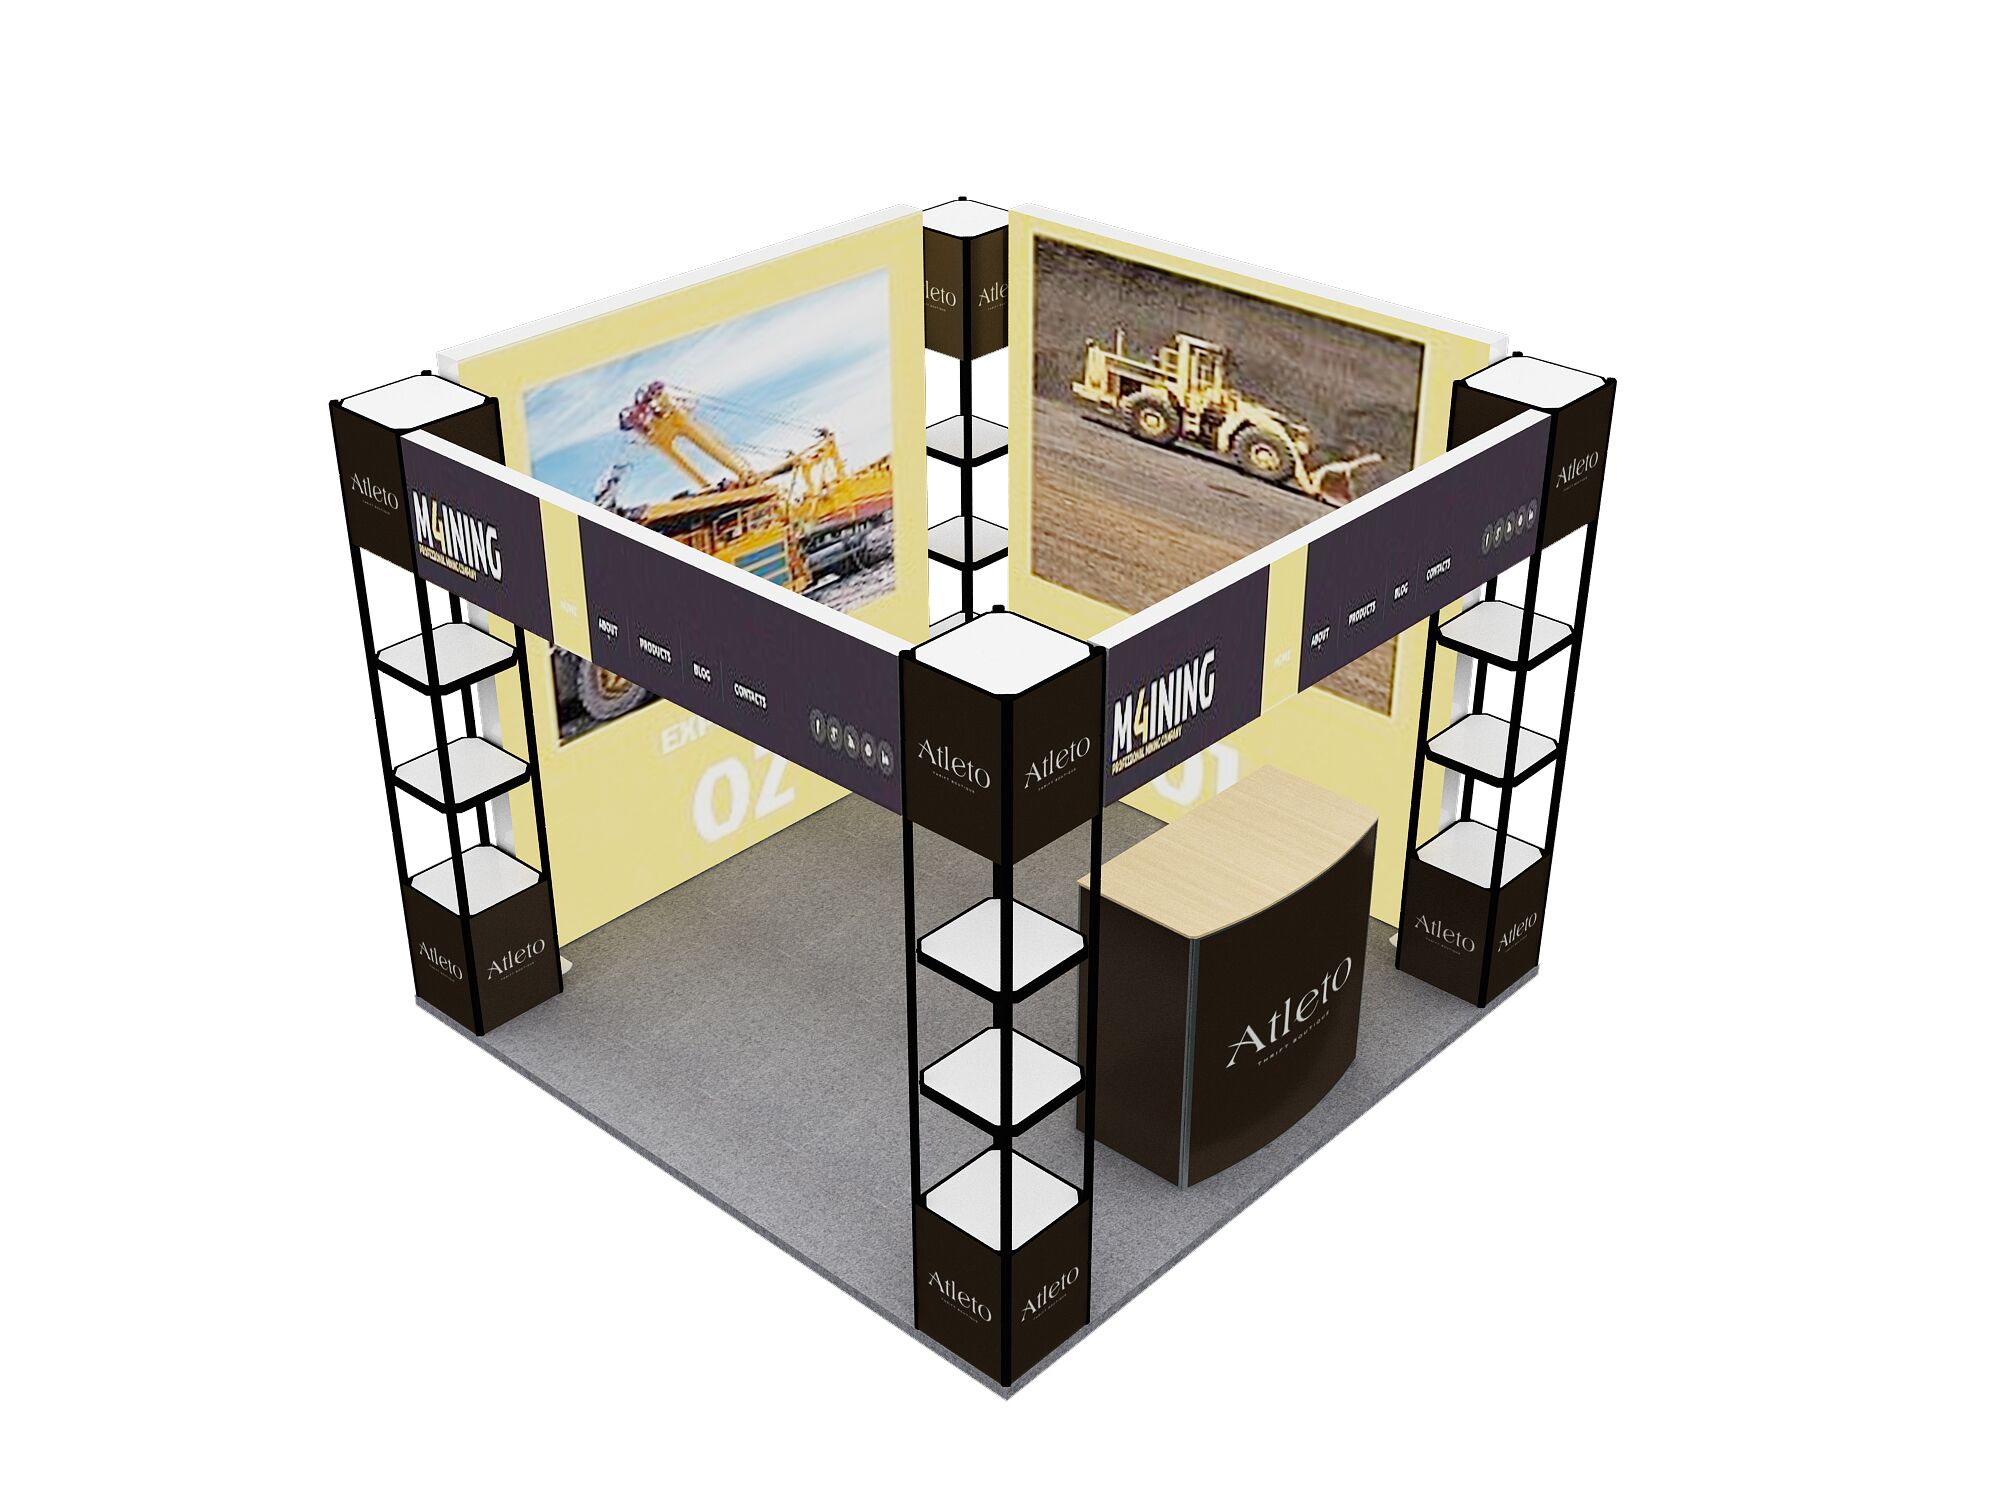 lightbox,booth system,trade show,exhibition